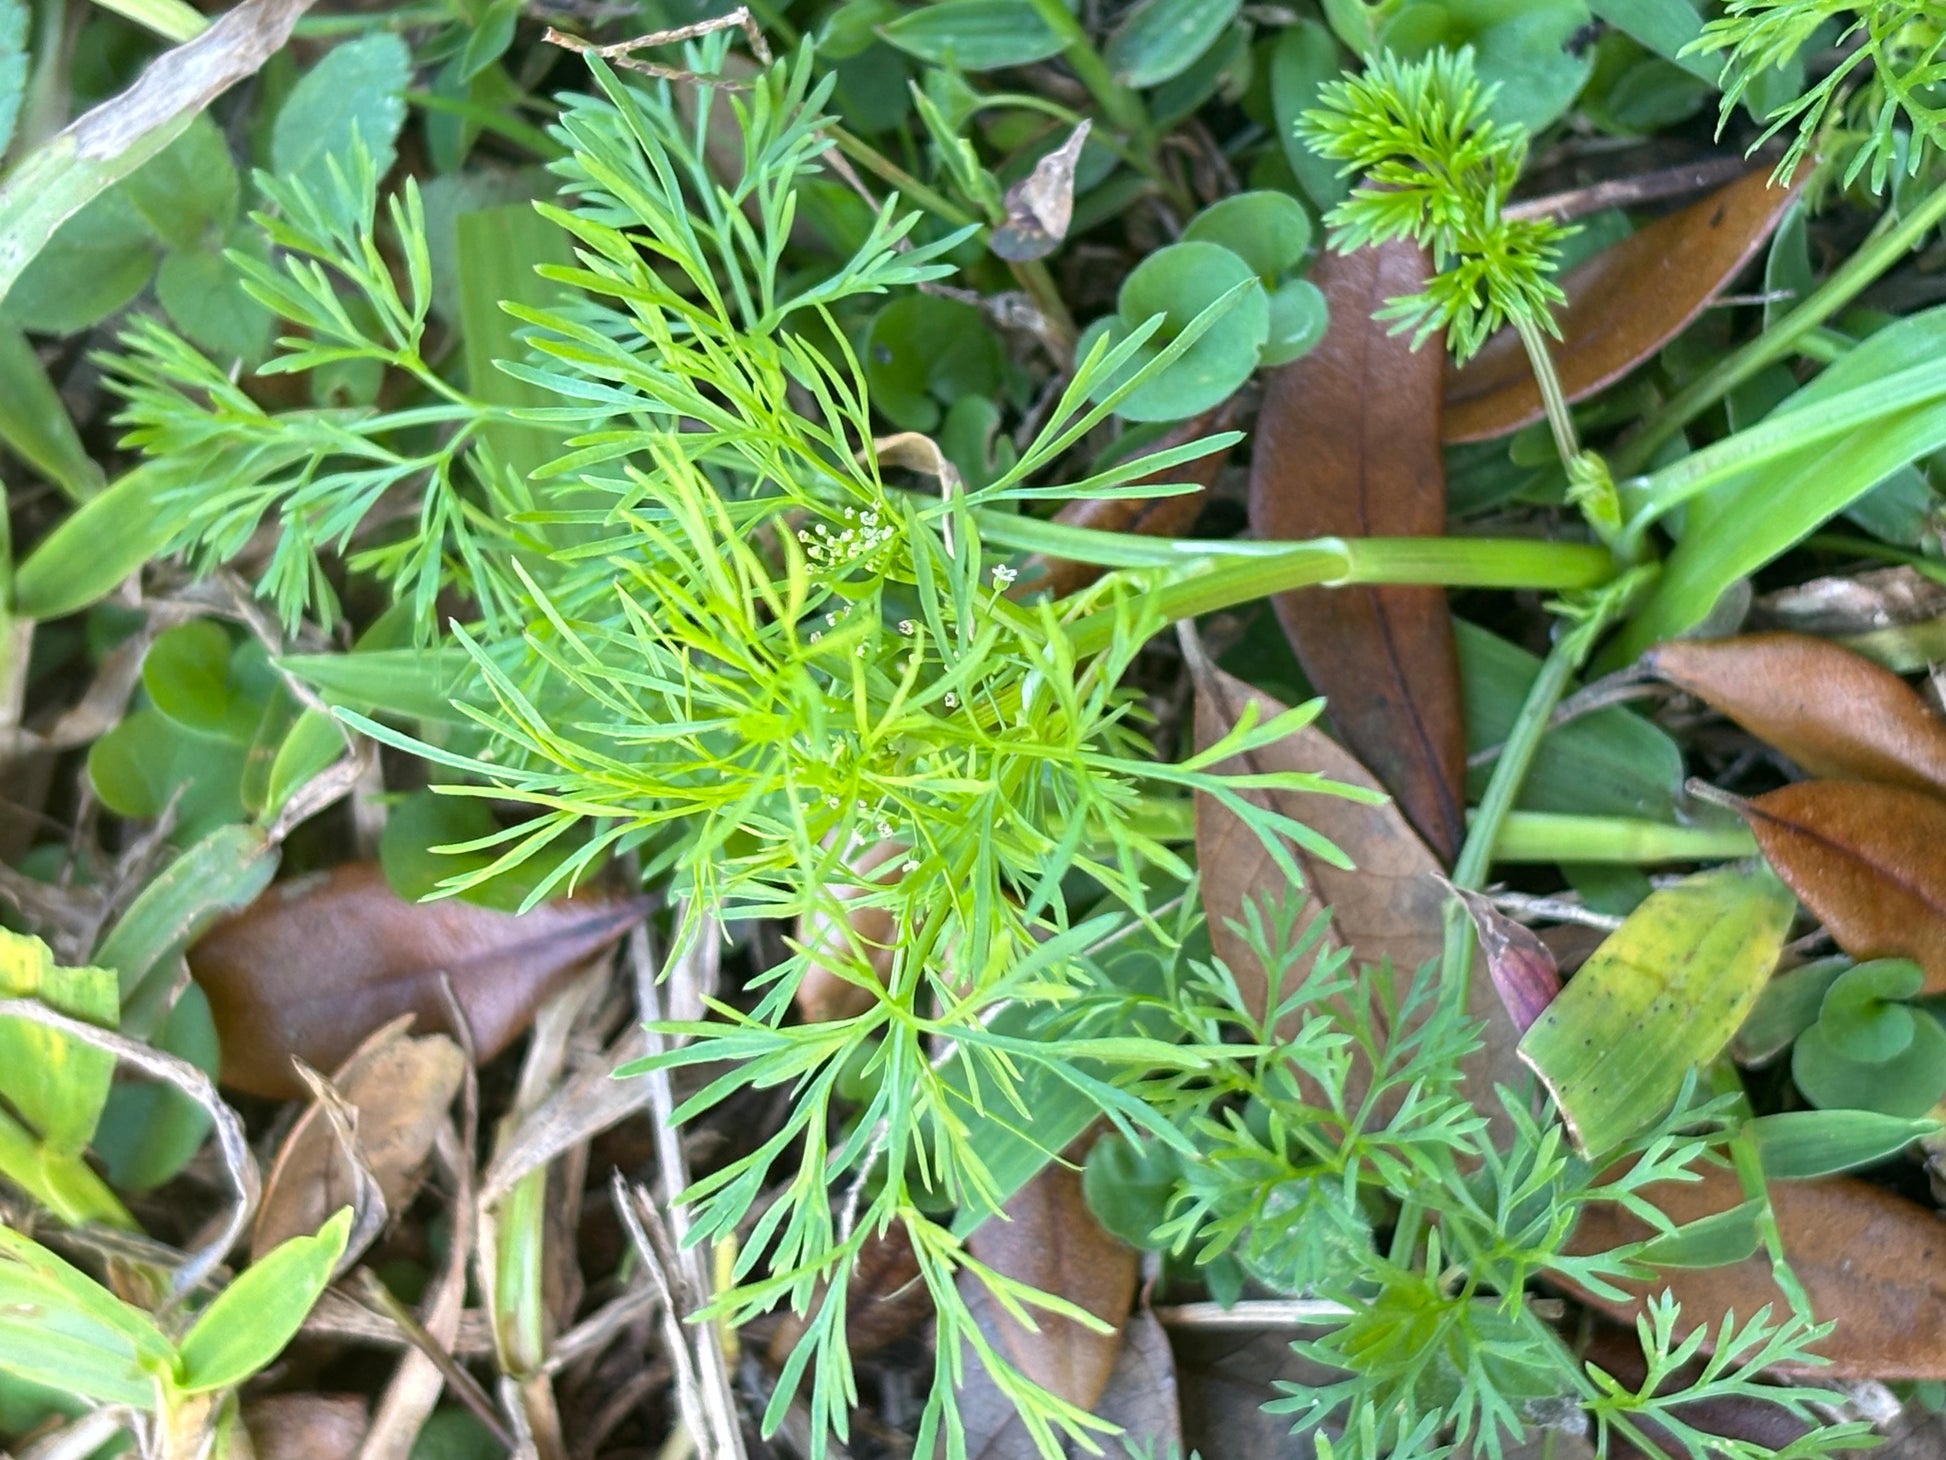 mock bishop's weed is important host plant for the black swallowtail butterfly